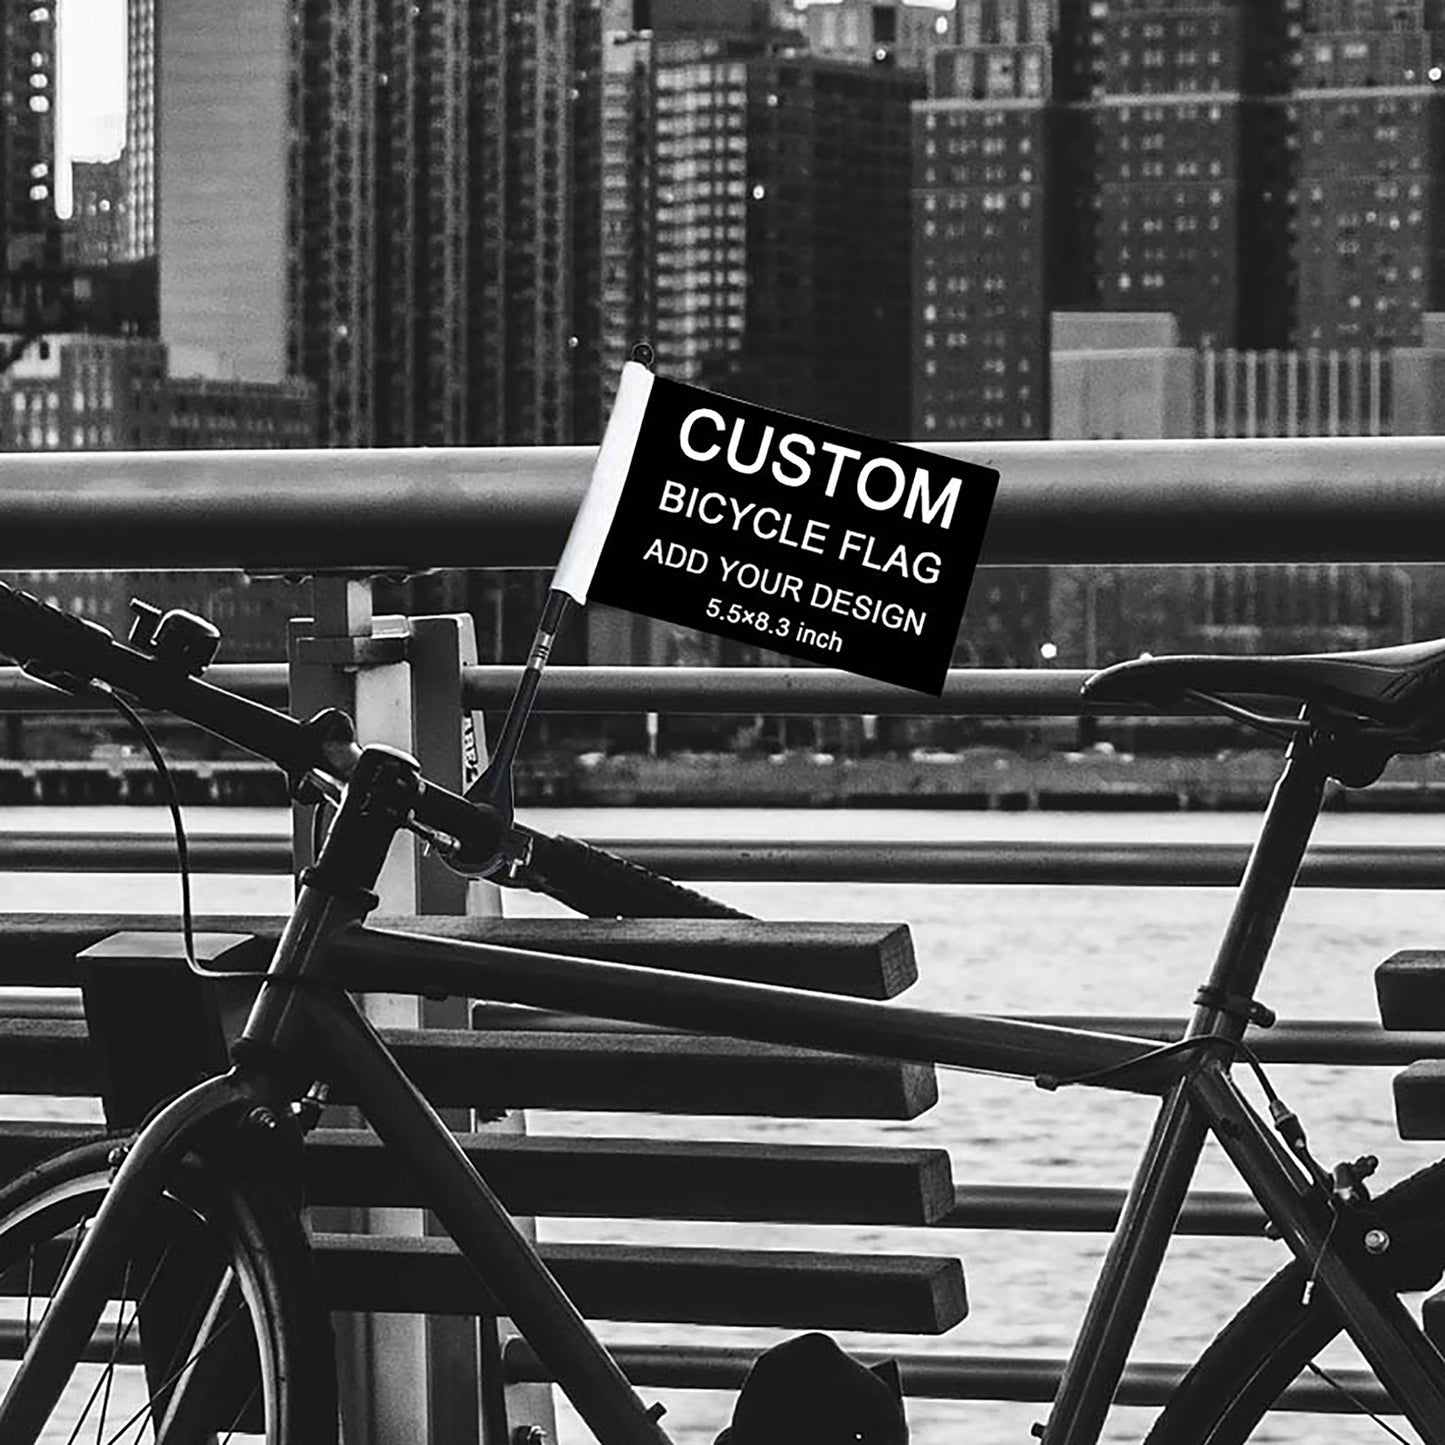 Personalized Bike Flags Custom Bicycle Flag Scooters for Riding Cycling